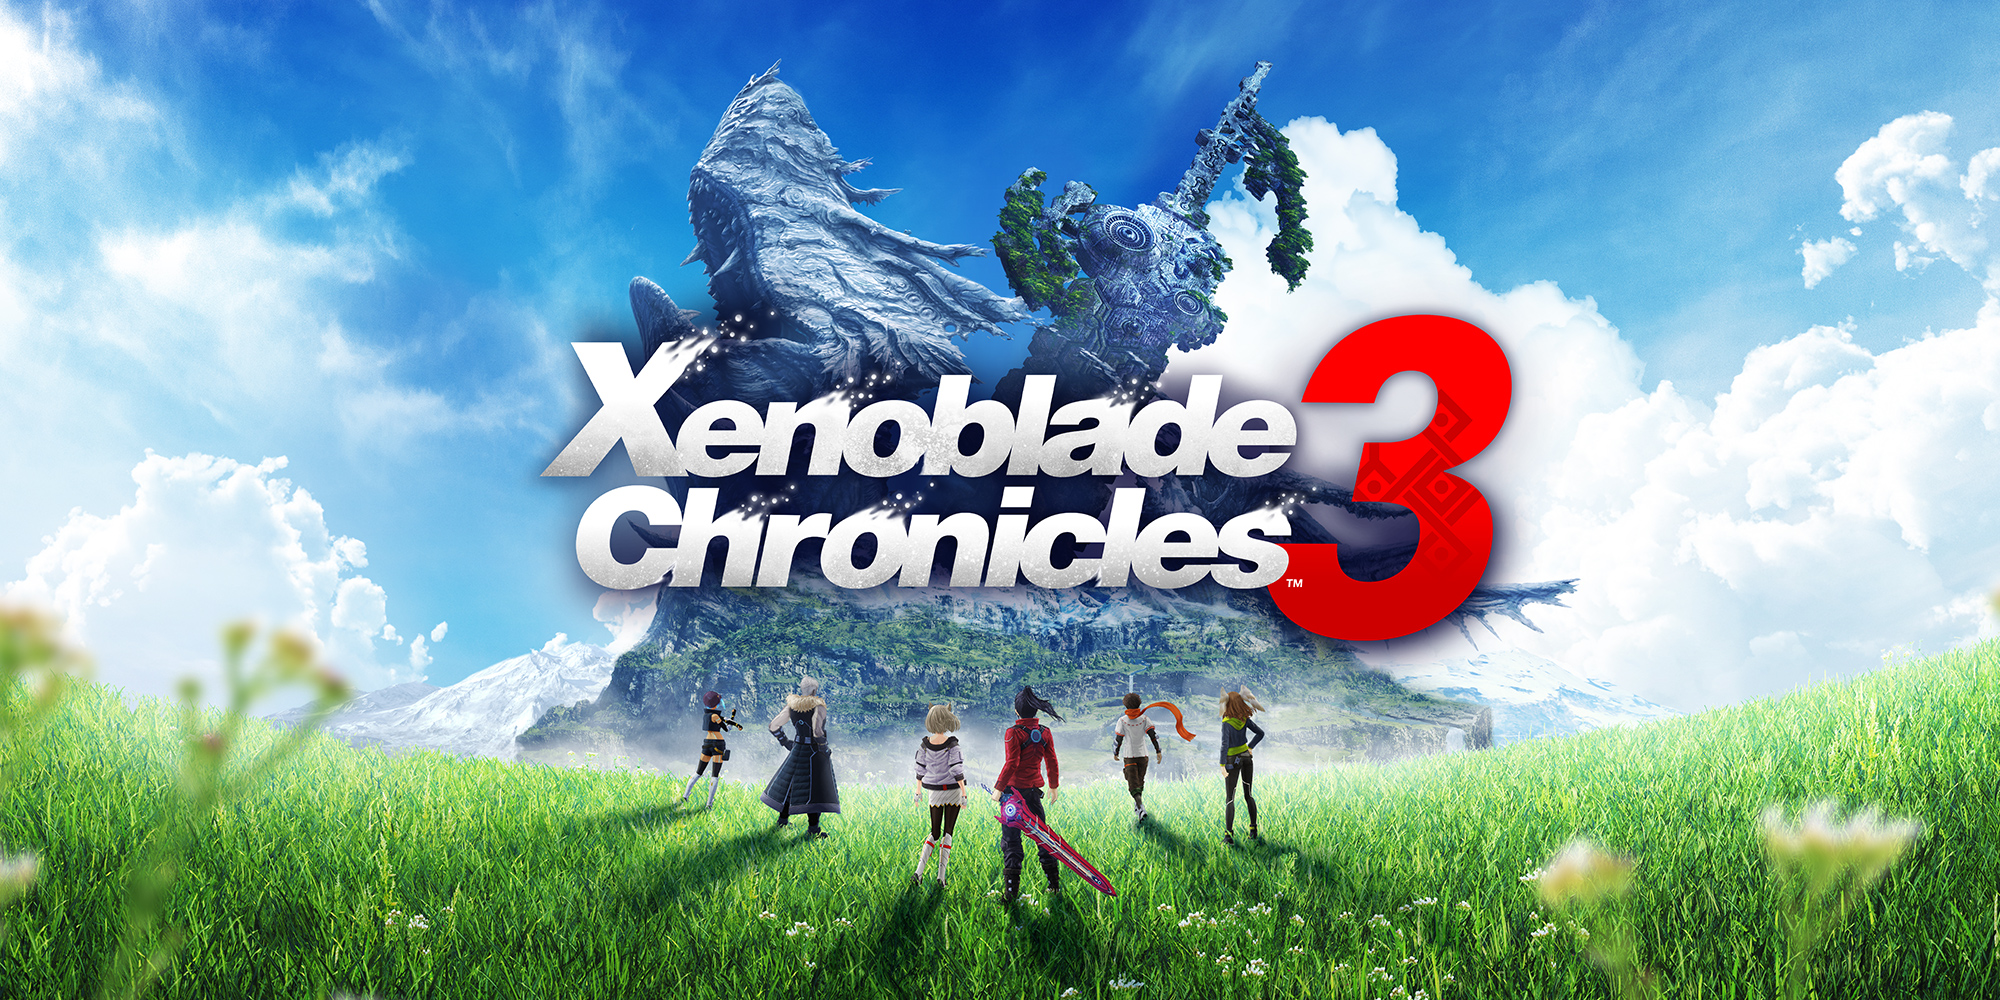 Initial Reviews Place Xenoblade Chronicles 3 Amongst Nintendo's Elite 2022  Games - EssentiallySports